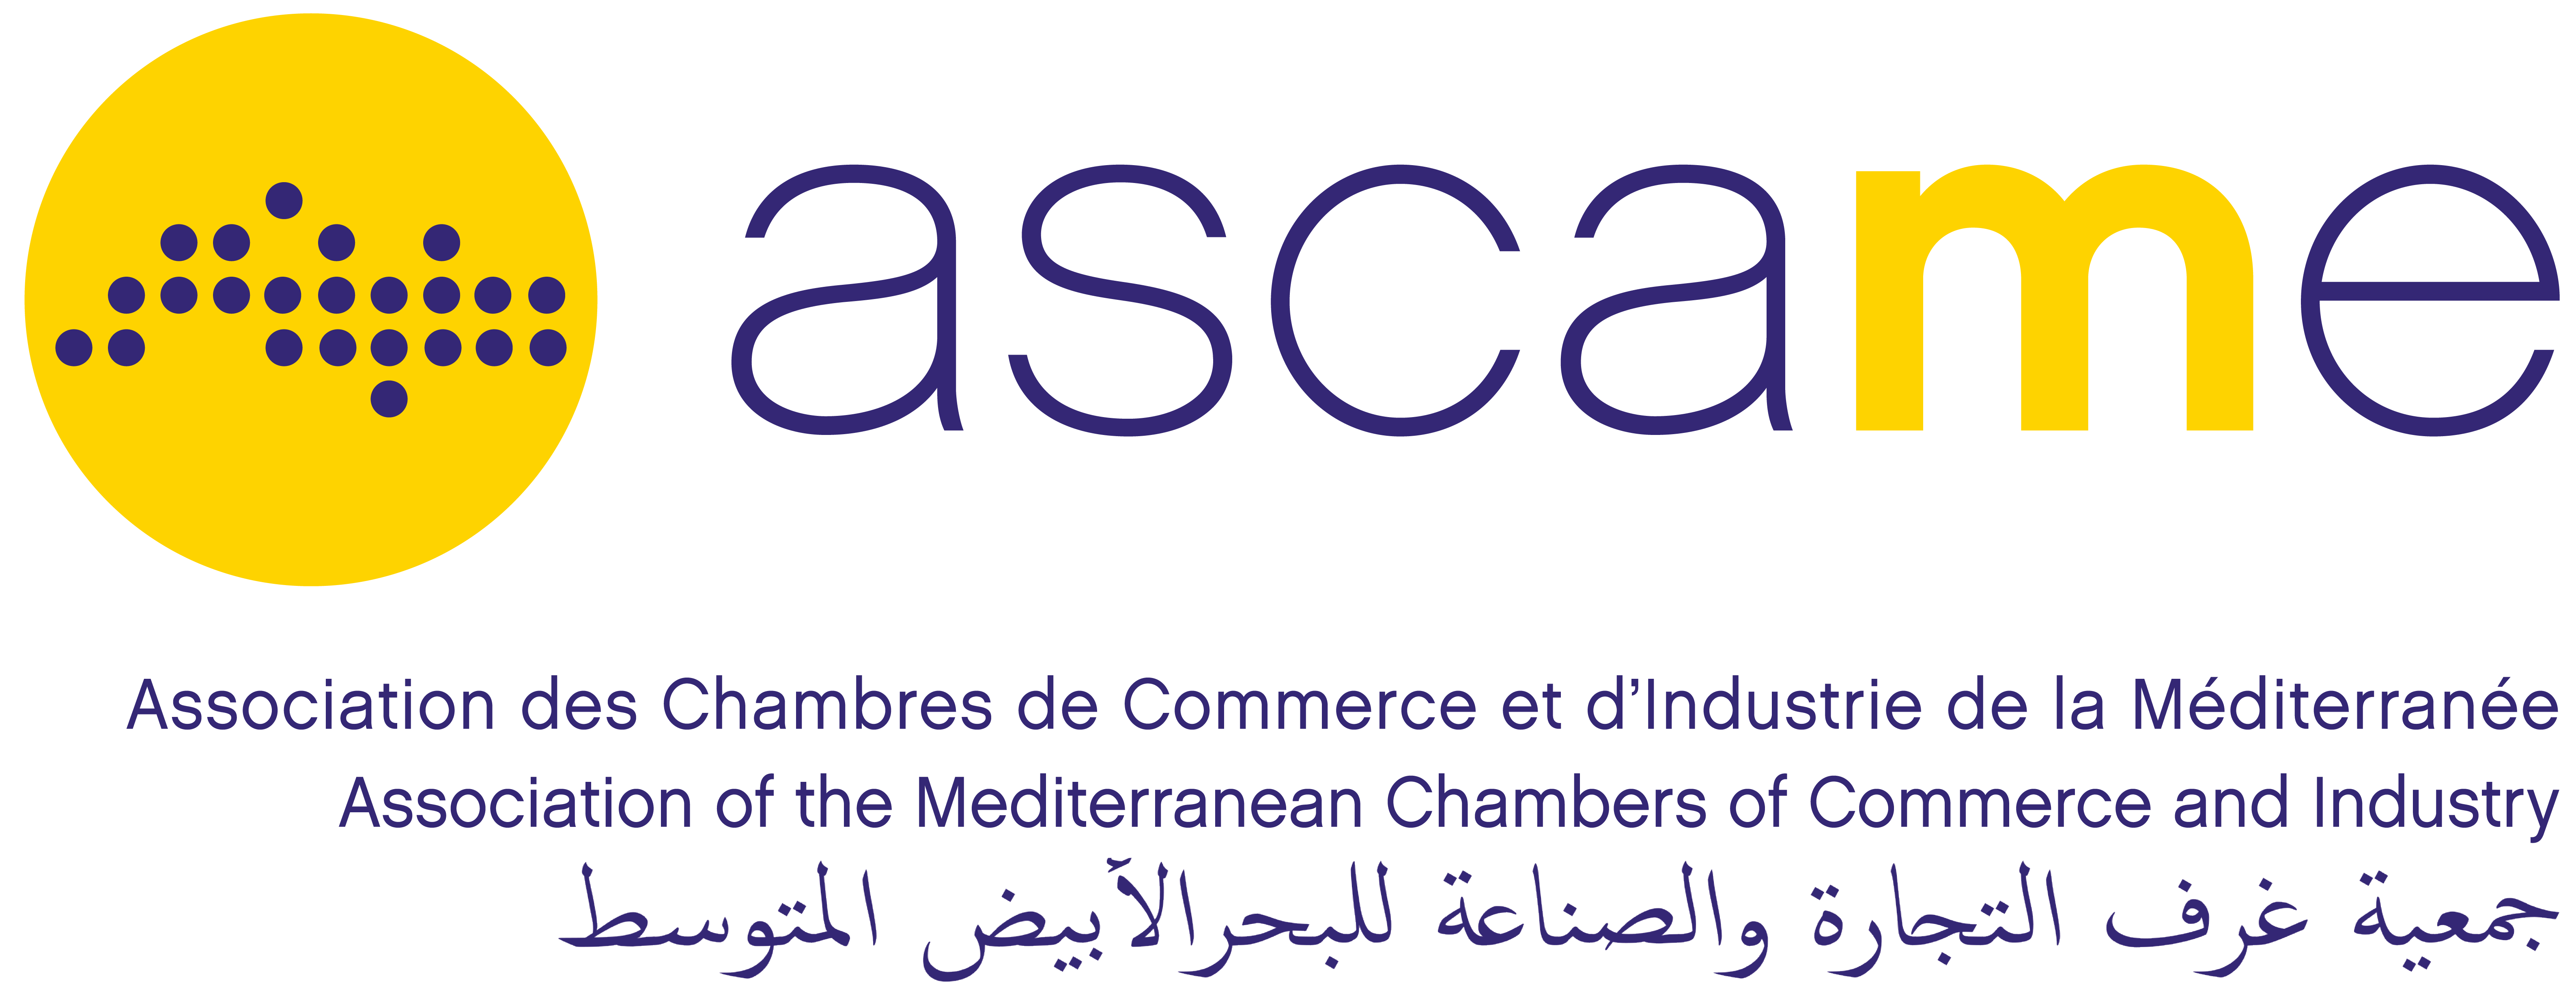 Association of the Mediterranean Chambers of Commerce and Industry (ASCAME)